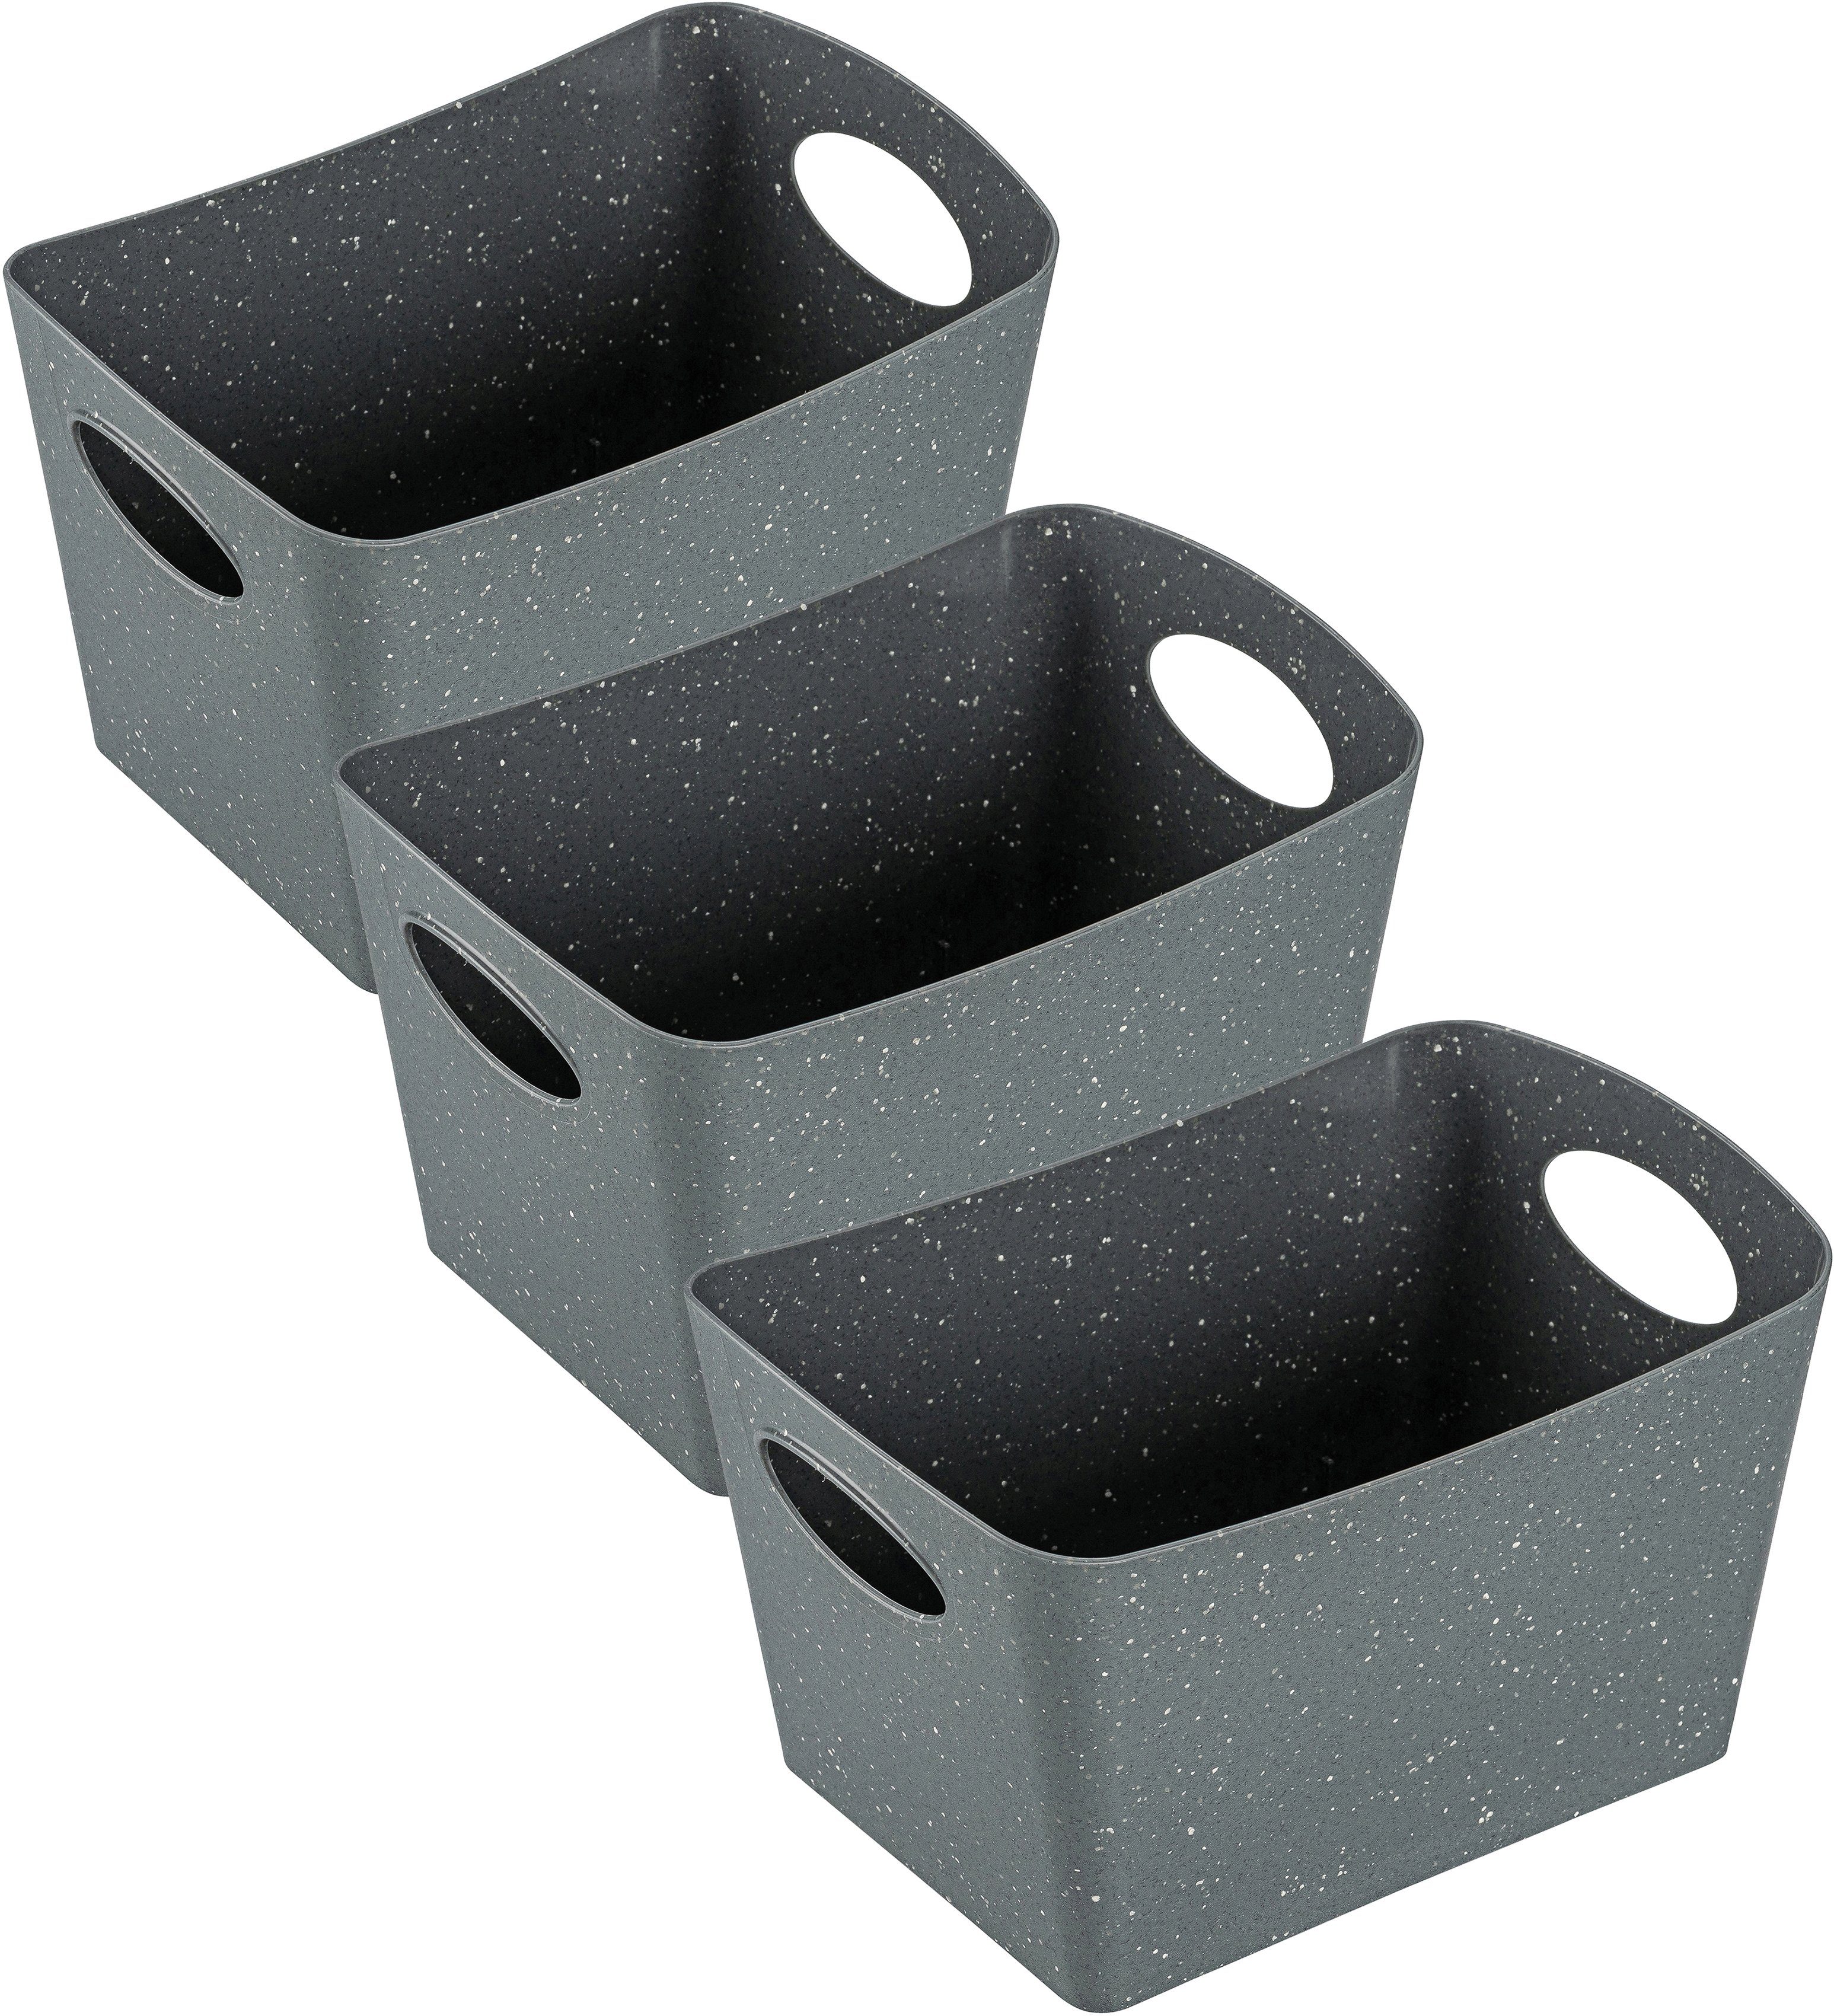 100% S recycled grey 3 Germany, recyceltes Aufbewahrungsbox, Material, in St), Organizer KOZIOL 1 BOXXX (Set, ash Made Liter